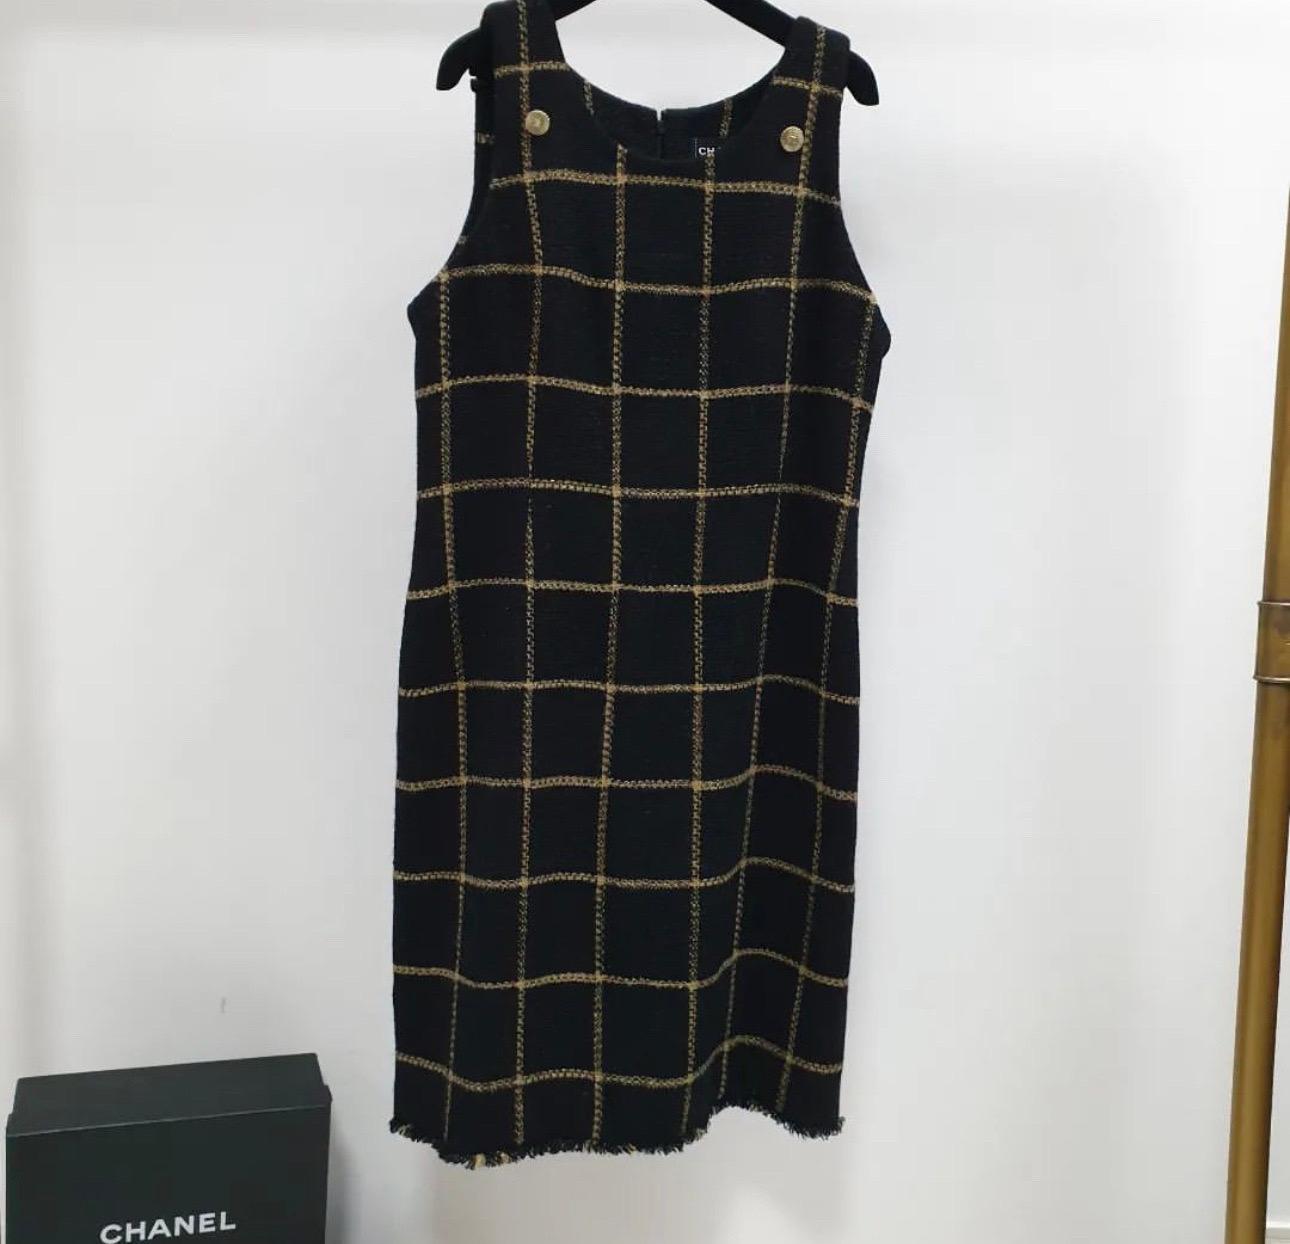 Chanel Black/Gold Sleeveless Tweed Dress
Made In France
Composition: 95% Wool, 5% Nylon
Back Zipper Closure
Sz. 42
Very good condition